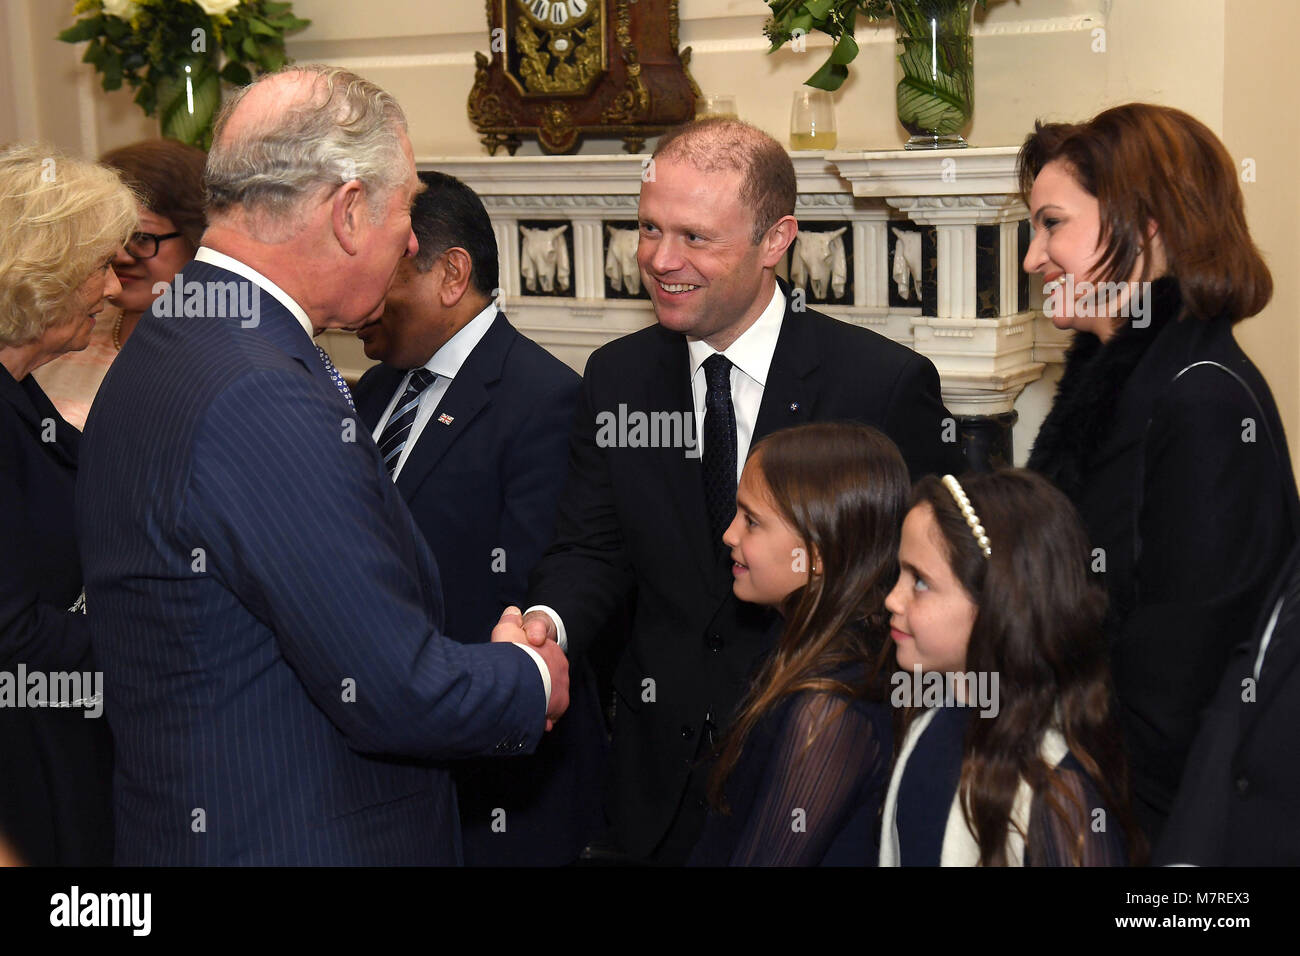 The Prince of Wales (left) meets meets the Prime Minister of Malta Joseph Muscat (centre), his wife Michelle Muscat (right) and their daughters at a reception held by the Commonwealth Secretary-General, Rt Hon Patricia Scotland QC, at Marlborough House, the home of the Commonwealth Secretariat in London. Stock Photo